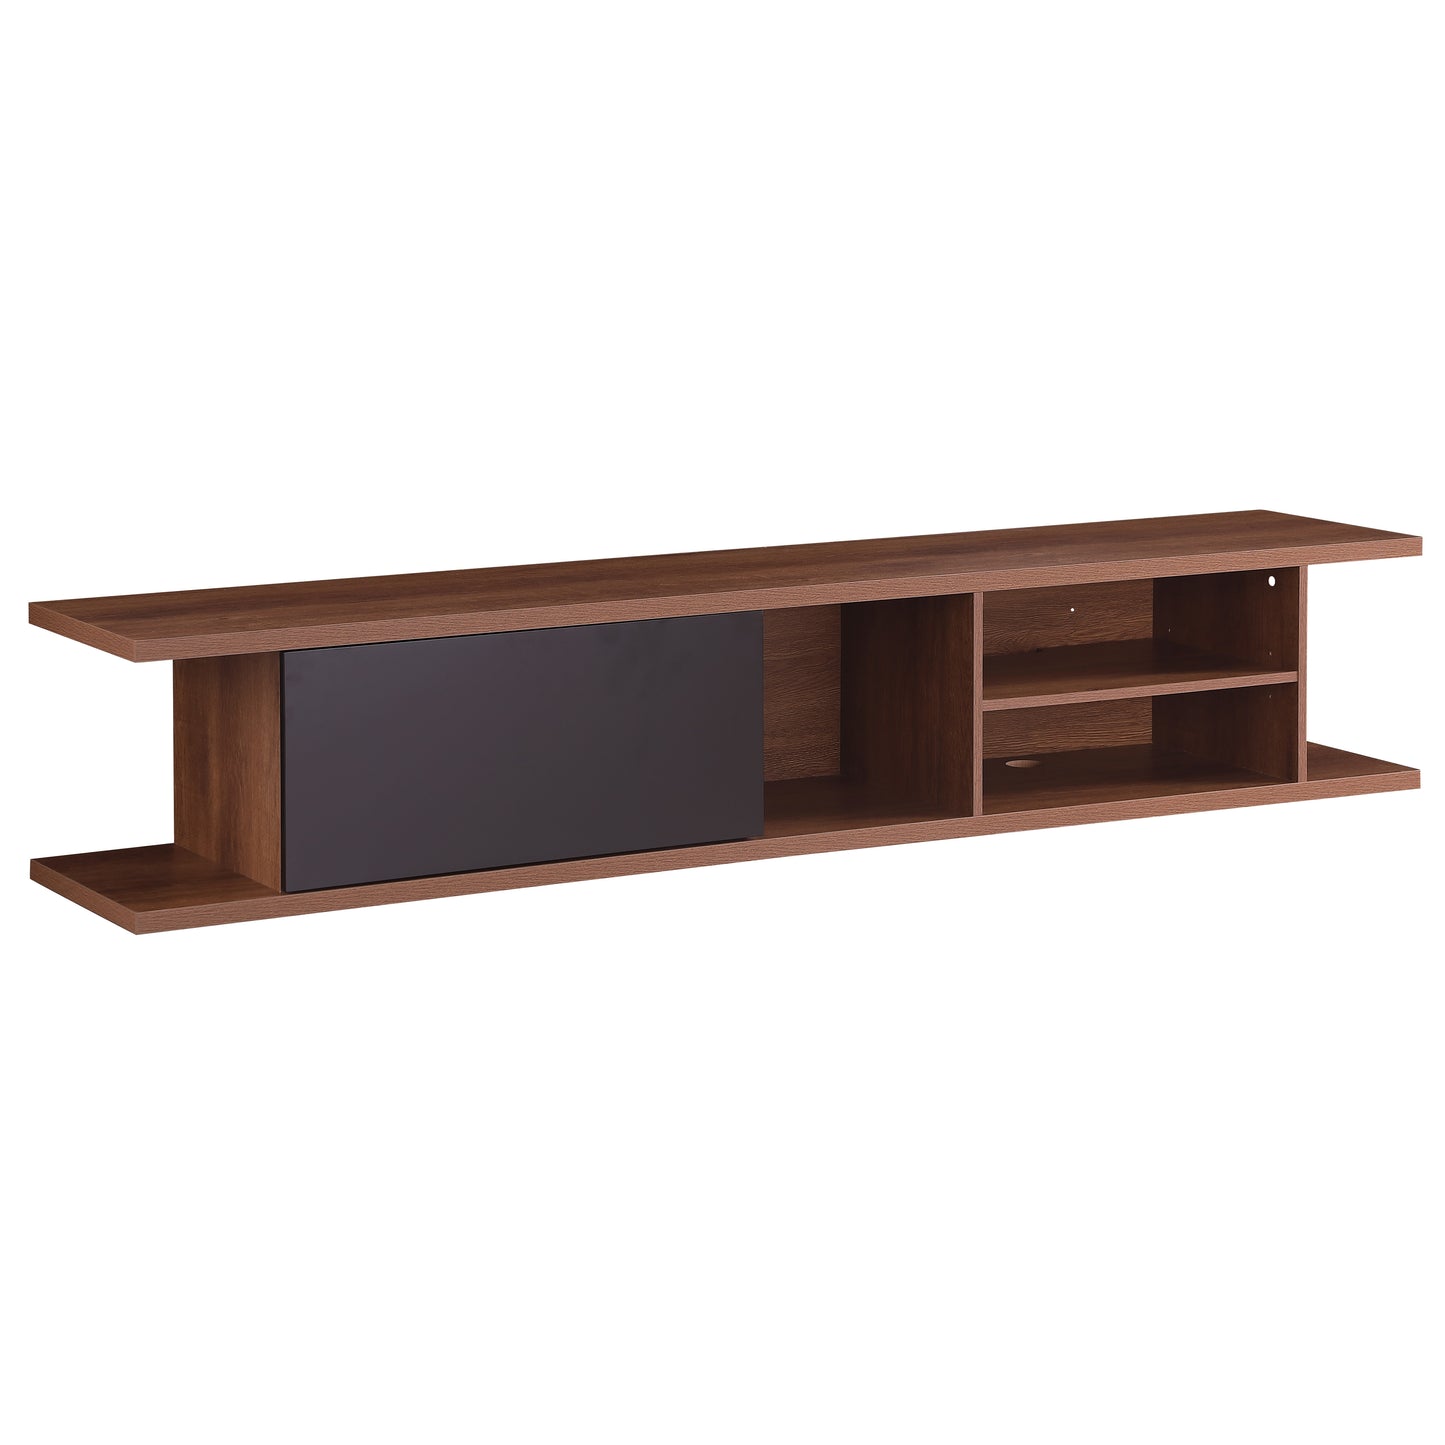 Tauris Auldrin 2000 Floating Entertainment Unit, Hovering Wall Mount Cabinet Dark Oak